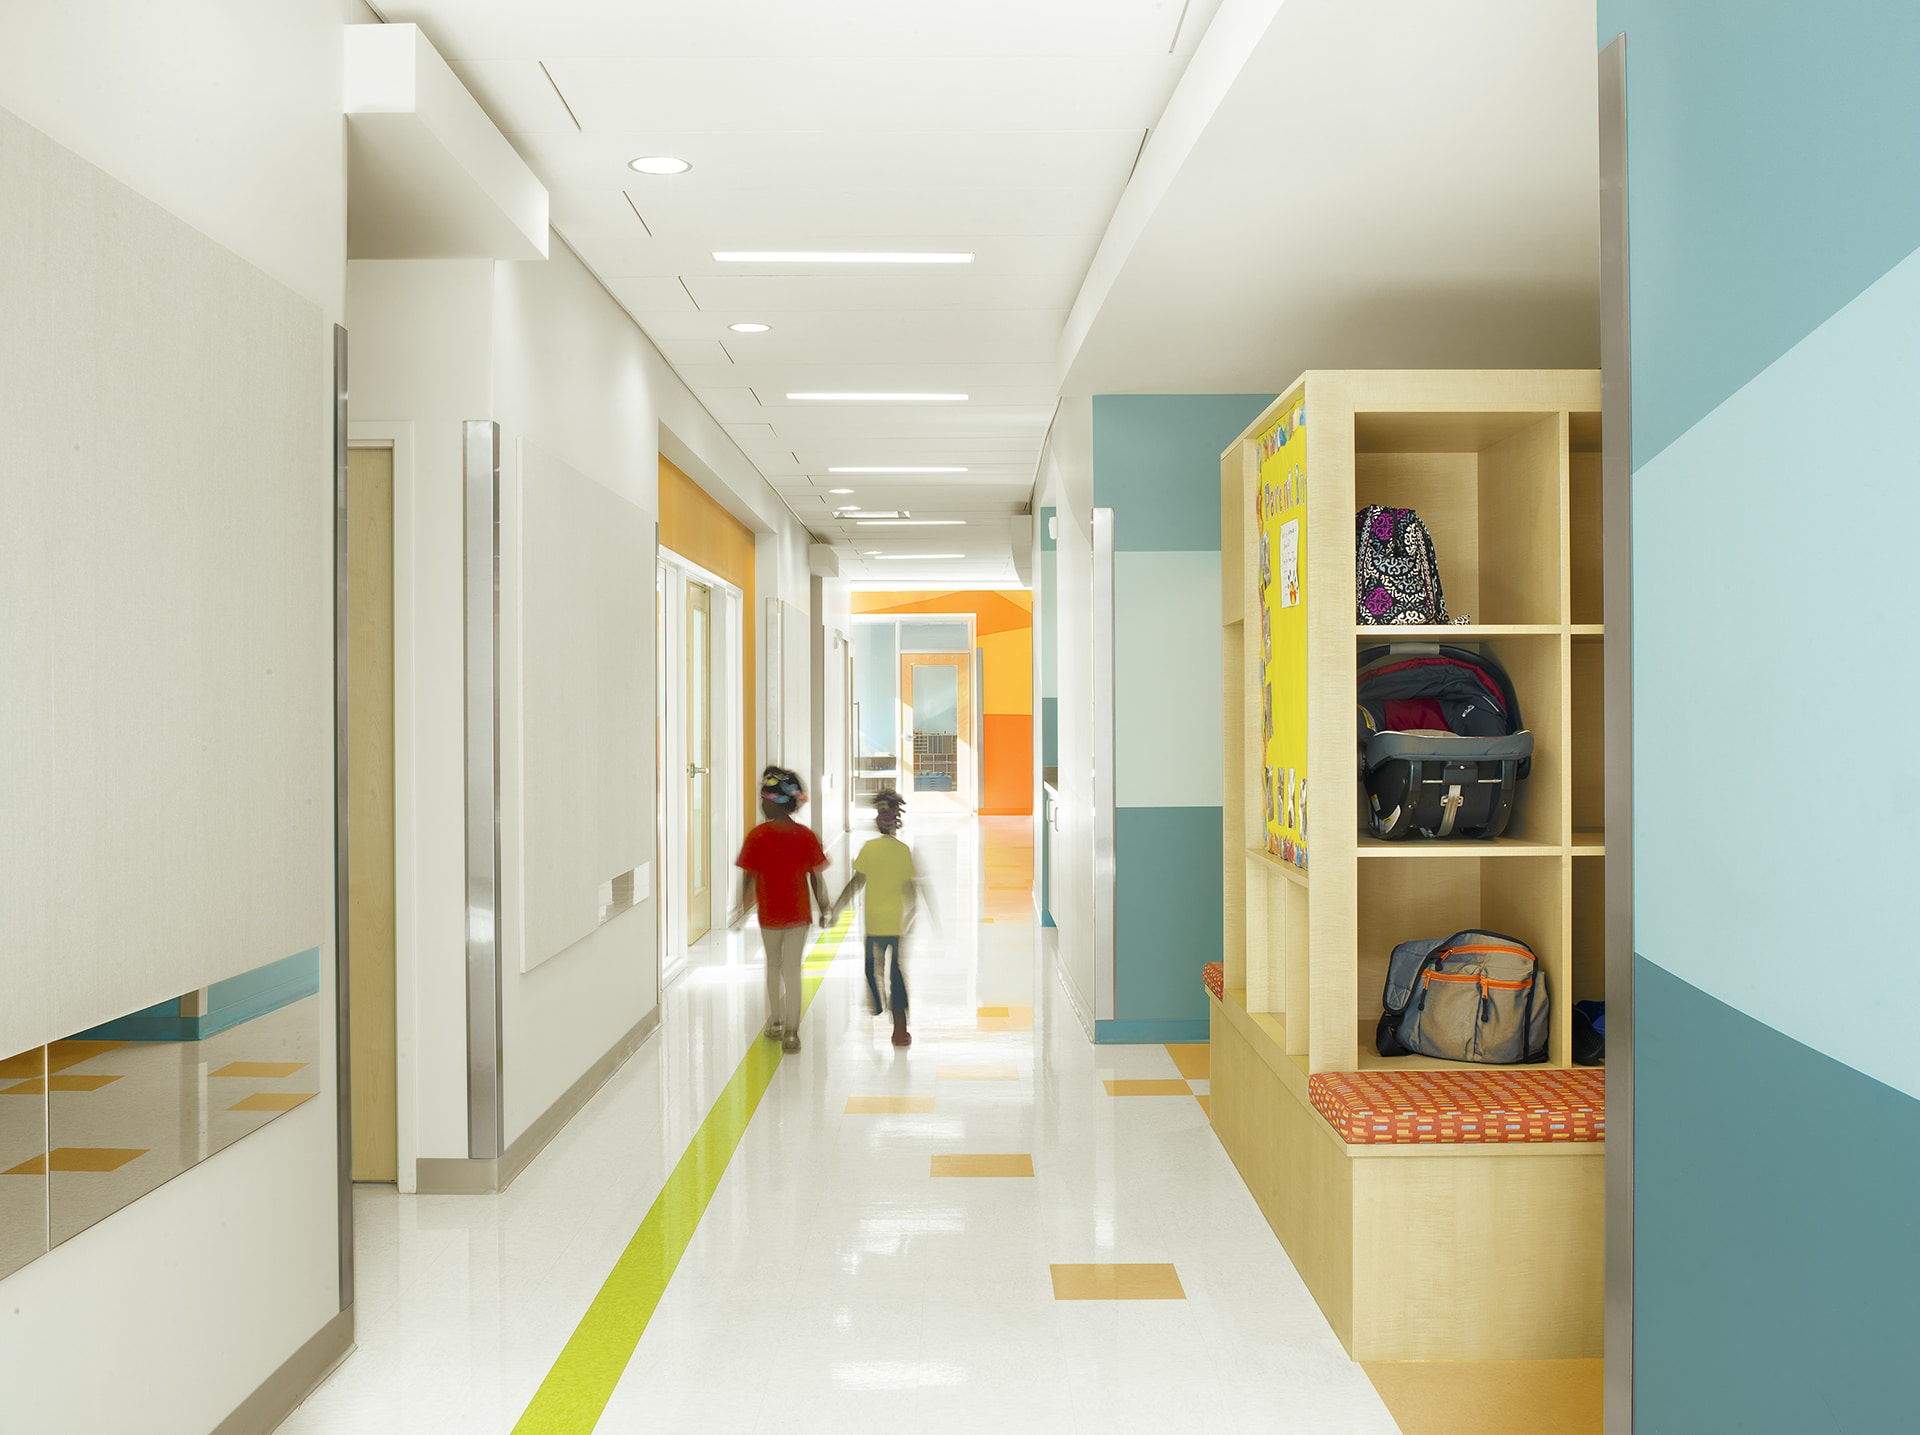 hallway of early childhood school designed by trivers architectural firm